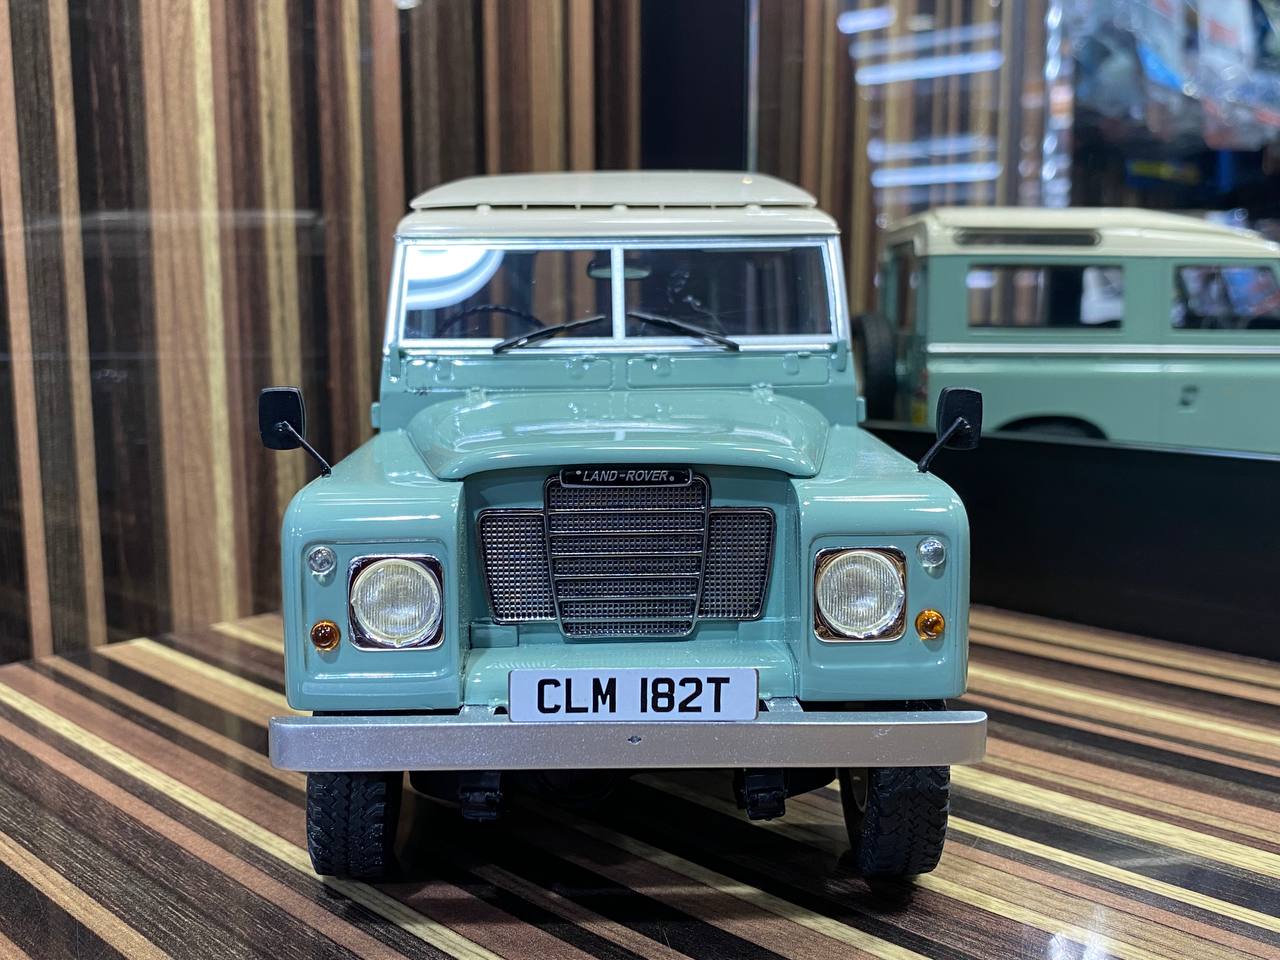 Cult Scale Model Land Rover 88 Series III (1978) - 1/18 Resin 